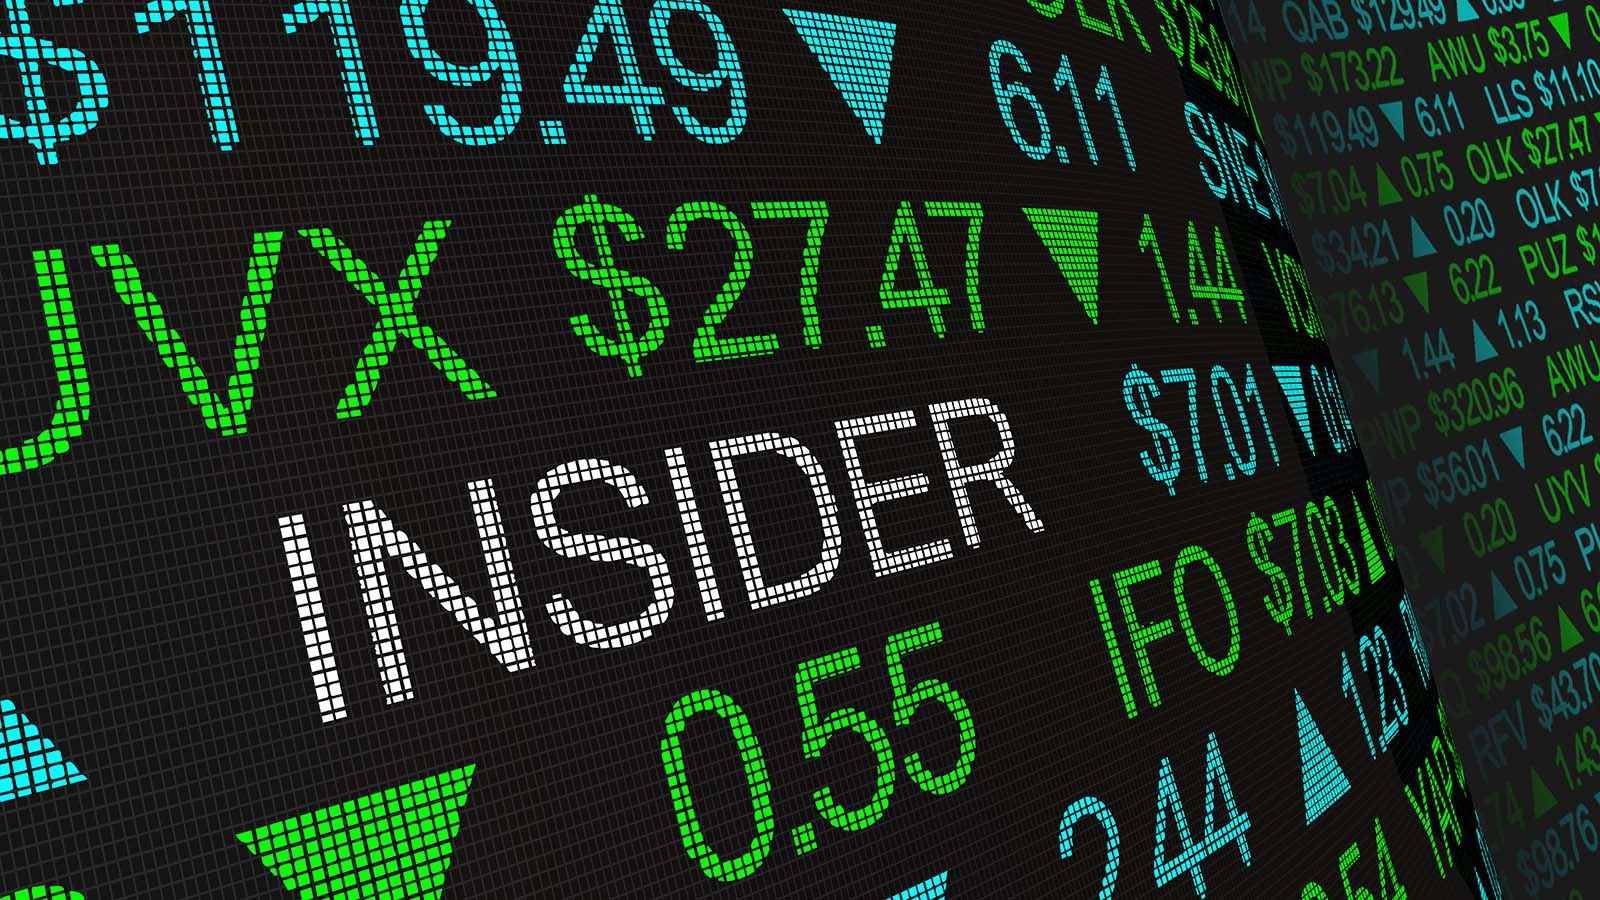 Insiders Are Betting Big on These 3 Stocks Under $10